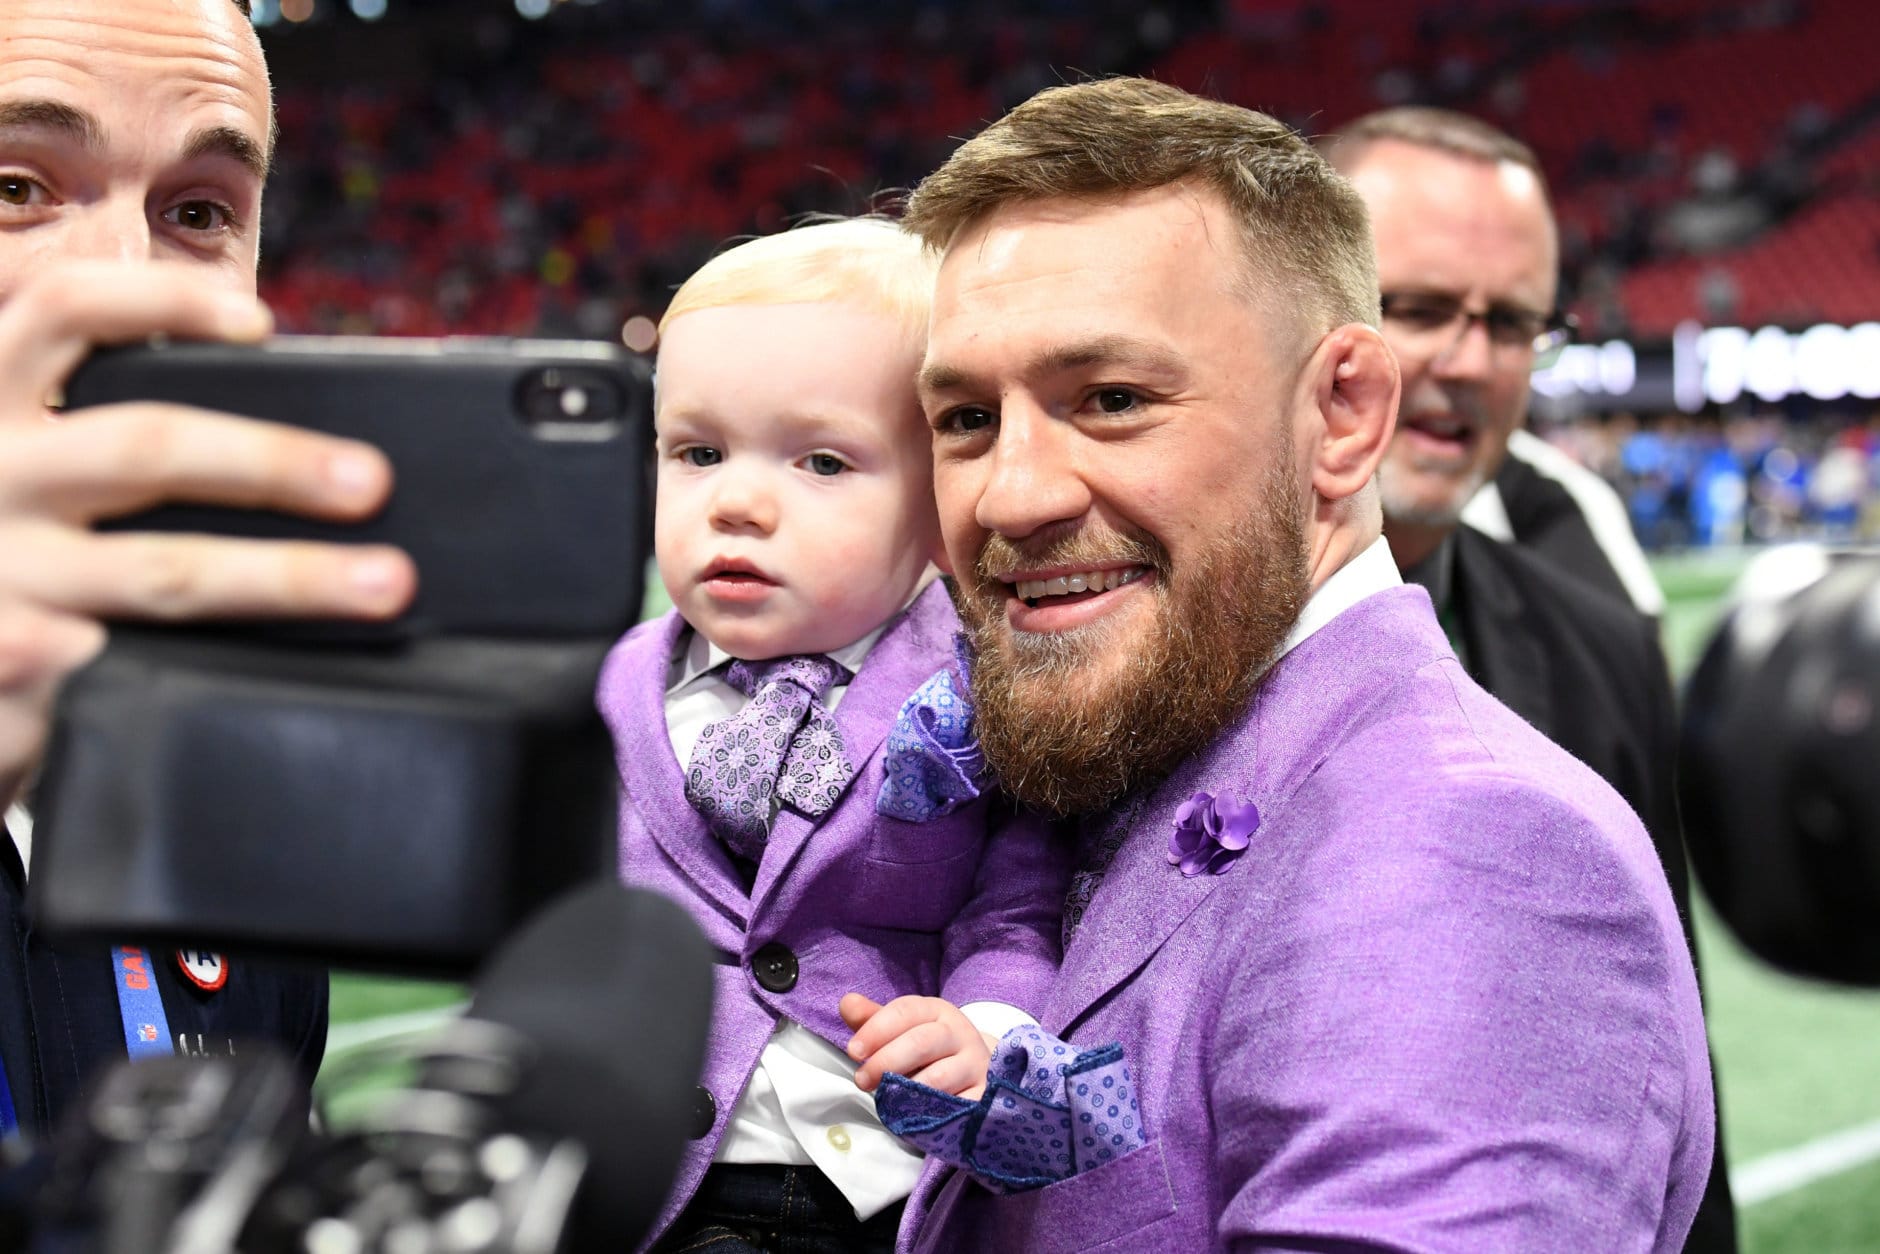 ATLANTA, GA - FEBRUARY 03:  Conor Jack McGregor Jr. (L) and Conor McGregor attend the Super Bowl LIII Pregame at Mercedes-Benz Stadium on February 3, 2019 in Atlanta, Georgia.  (Photo by Kevin Winter/Getty Images)